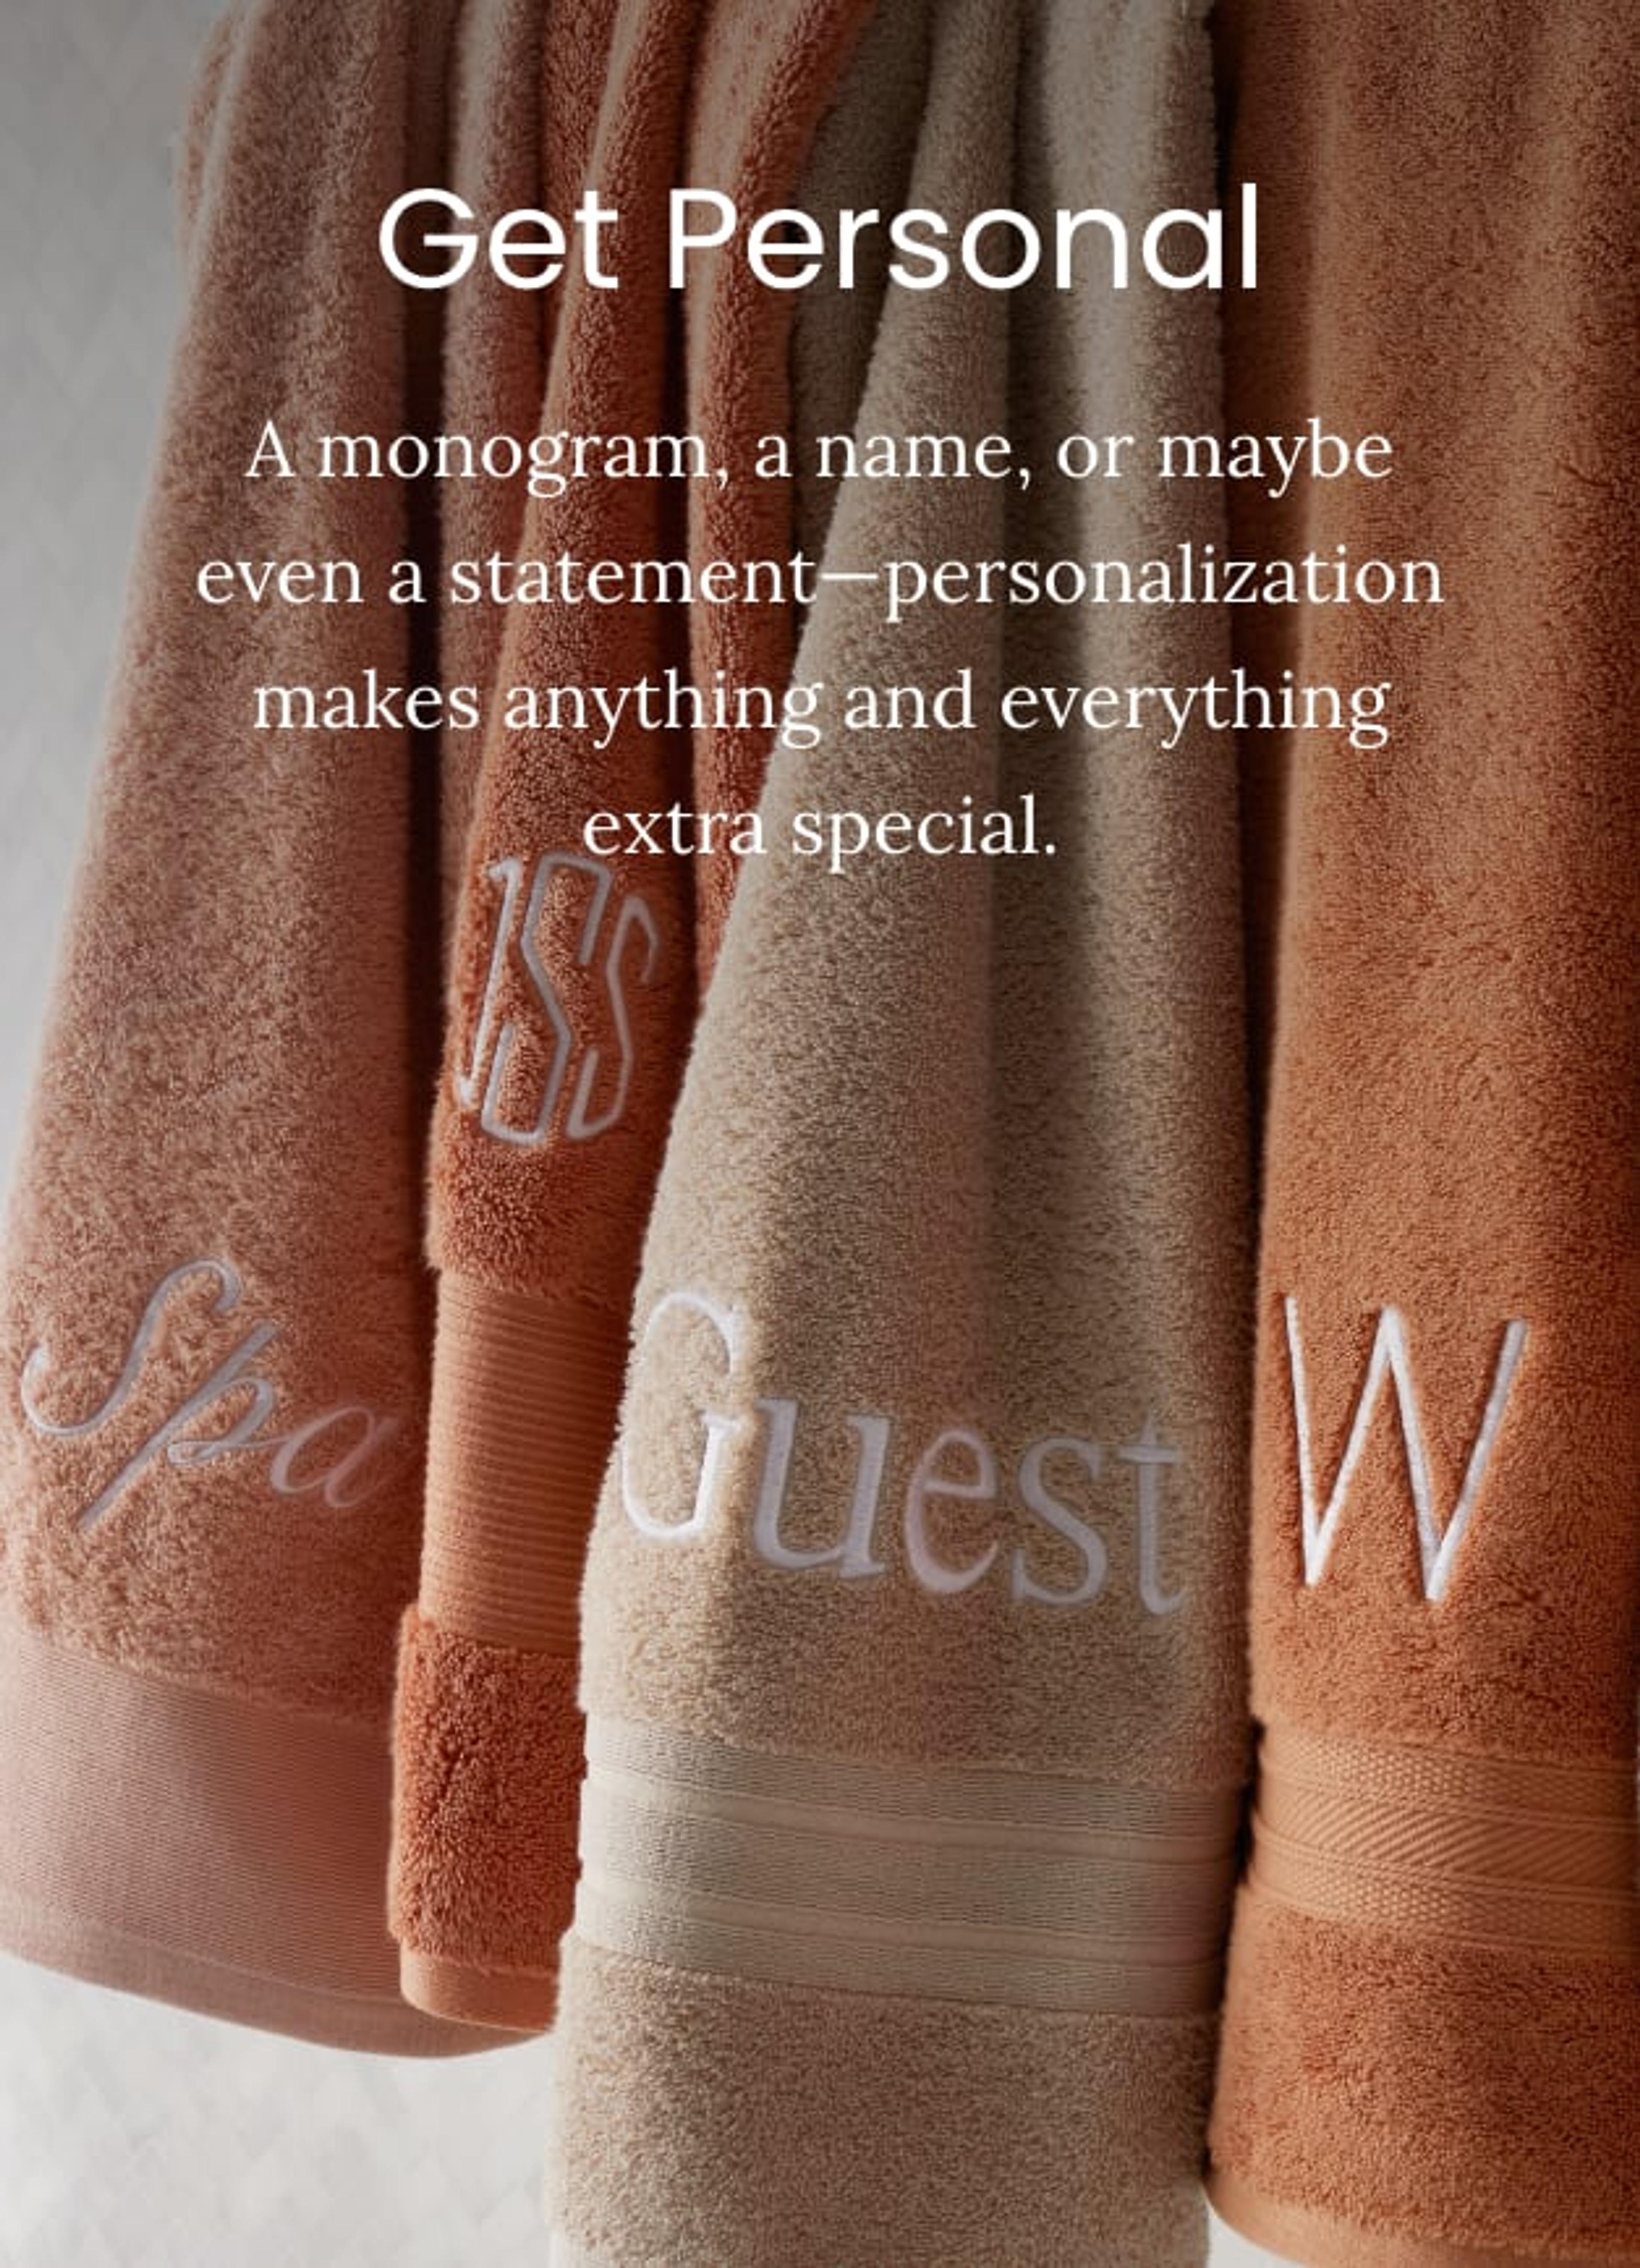 Personalized Monogrammed Towels | The Company Store